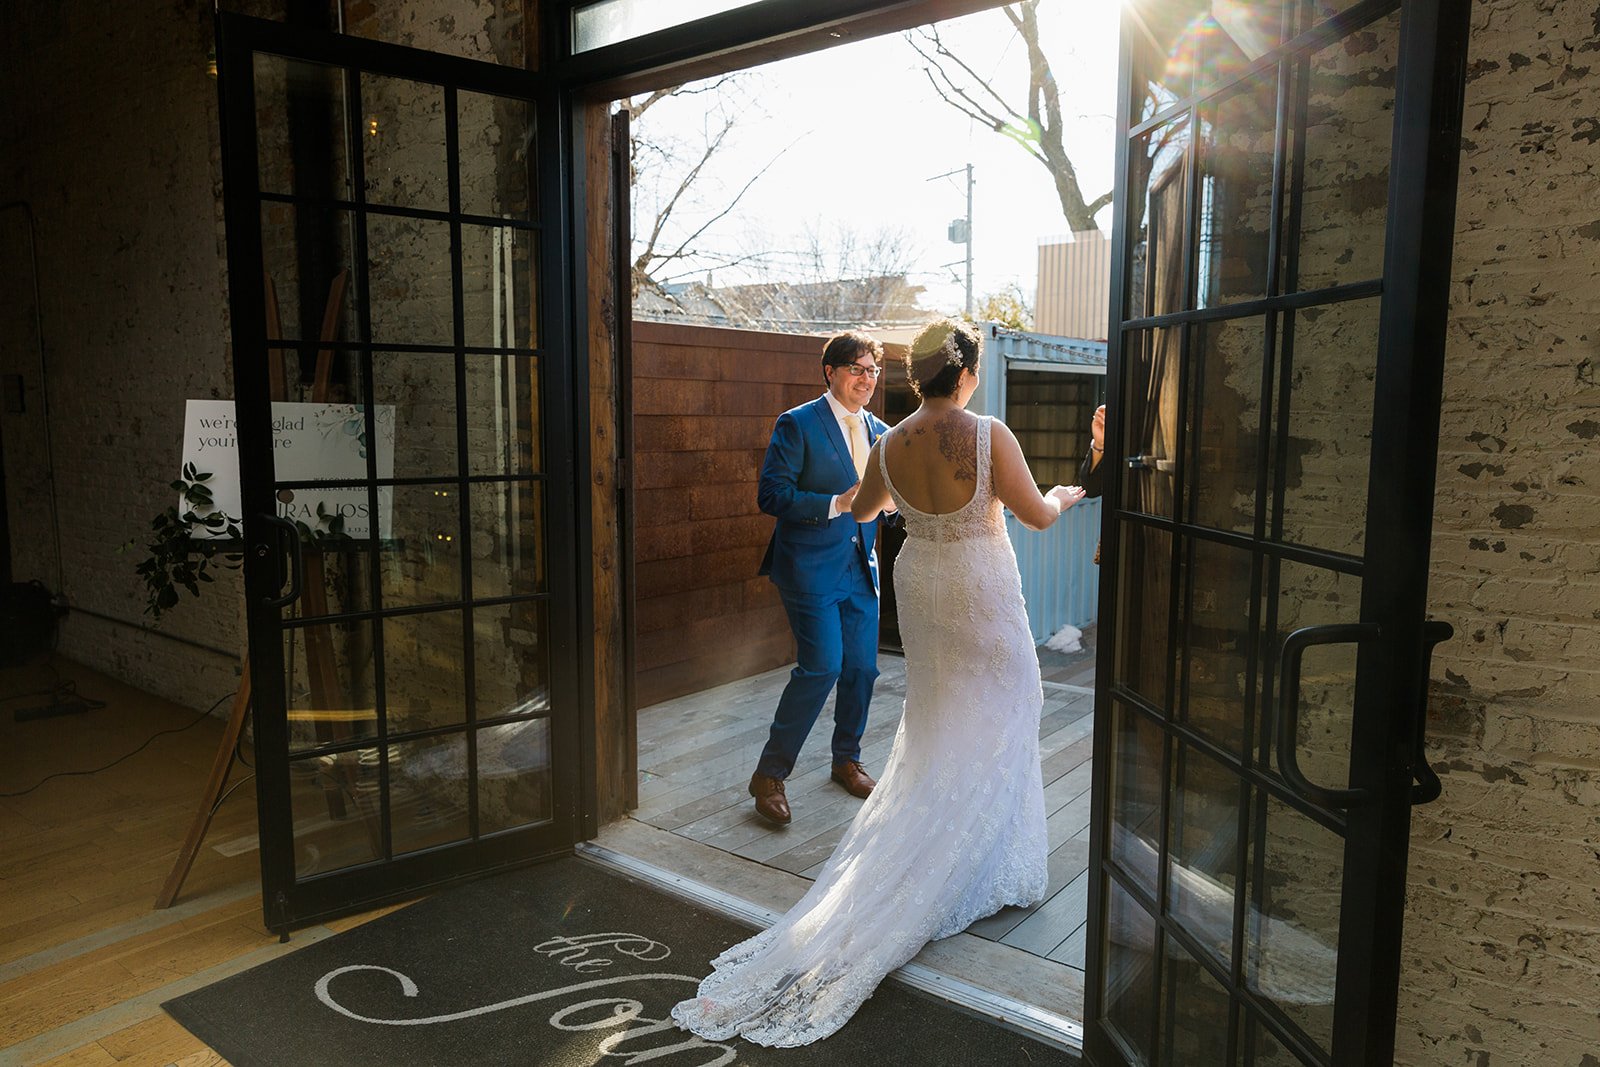  Candid, documentary photo of the couple exiting their nontraditional Jewish and Venezuelan wedding ceremony in the round at The Joinery Chicago an Industrial loft wedding venue In Logan Square. 